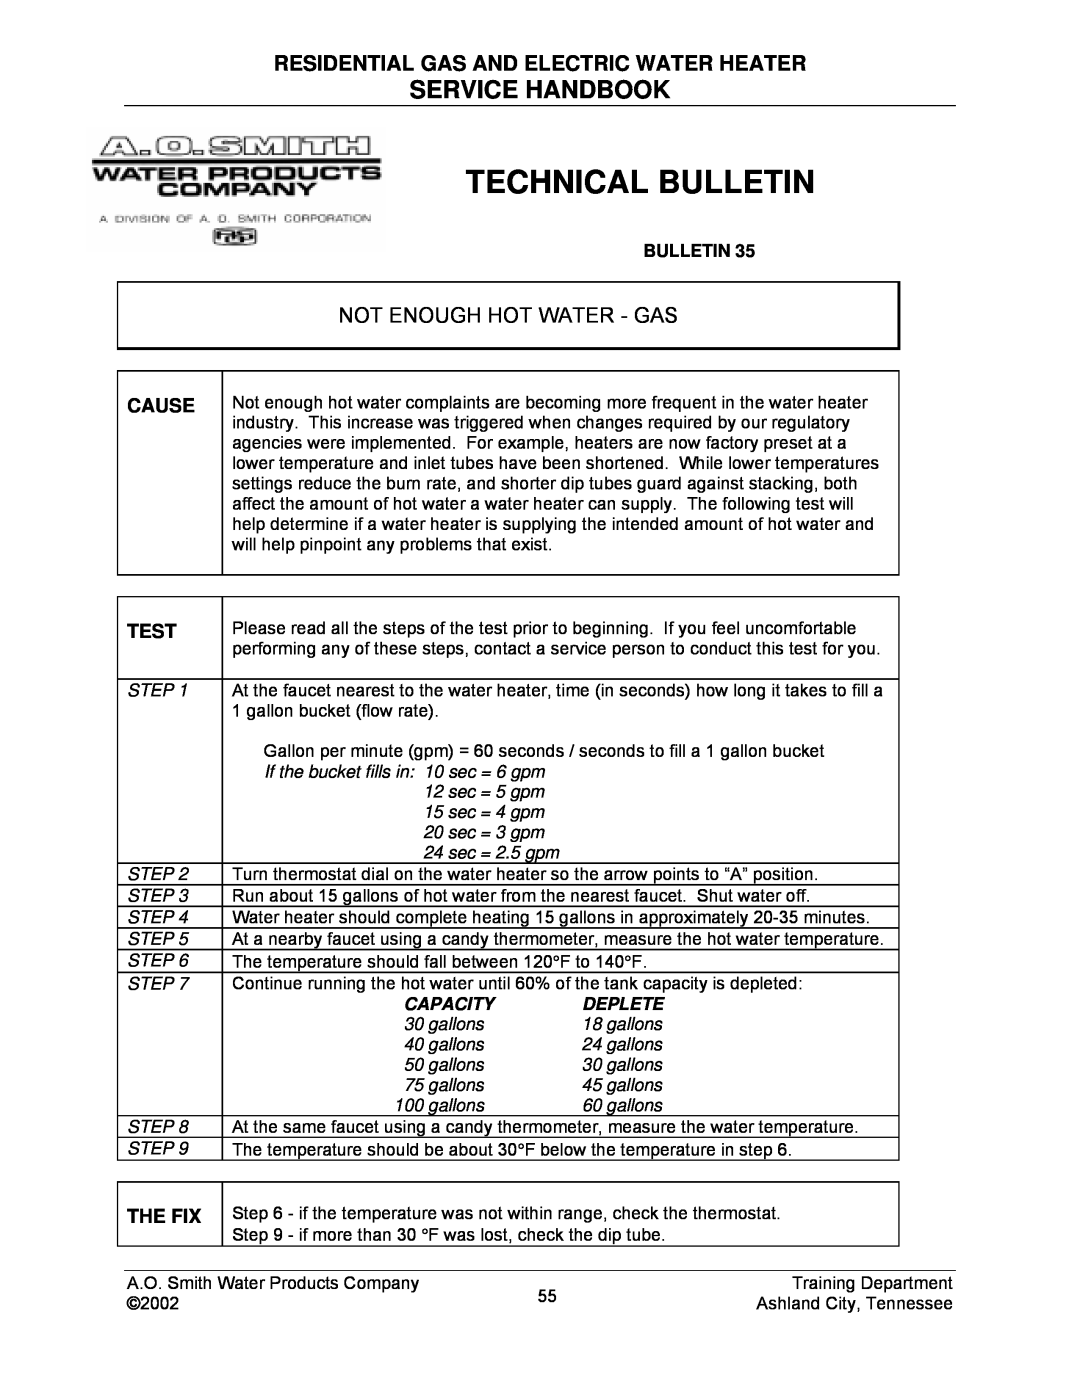 A.O. Smith TC-049-R2 Technical Bulletin, Service Handbook, Residential Gas And Electric Water Heater, Capacity, Deplete 